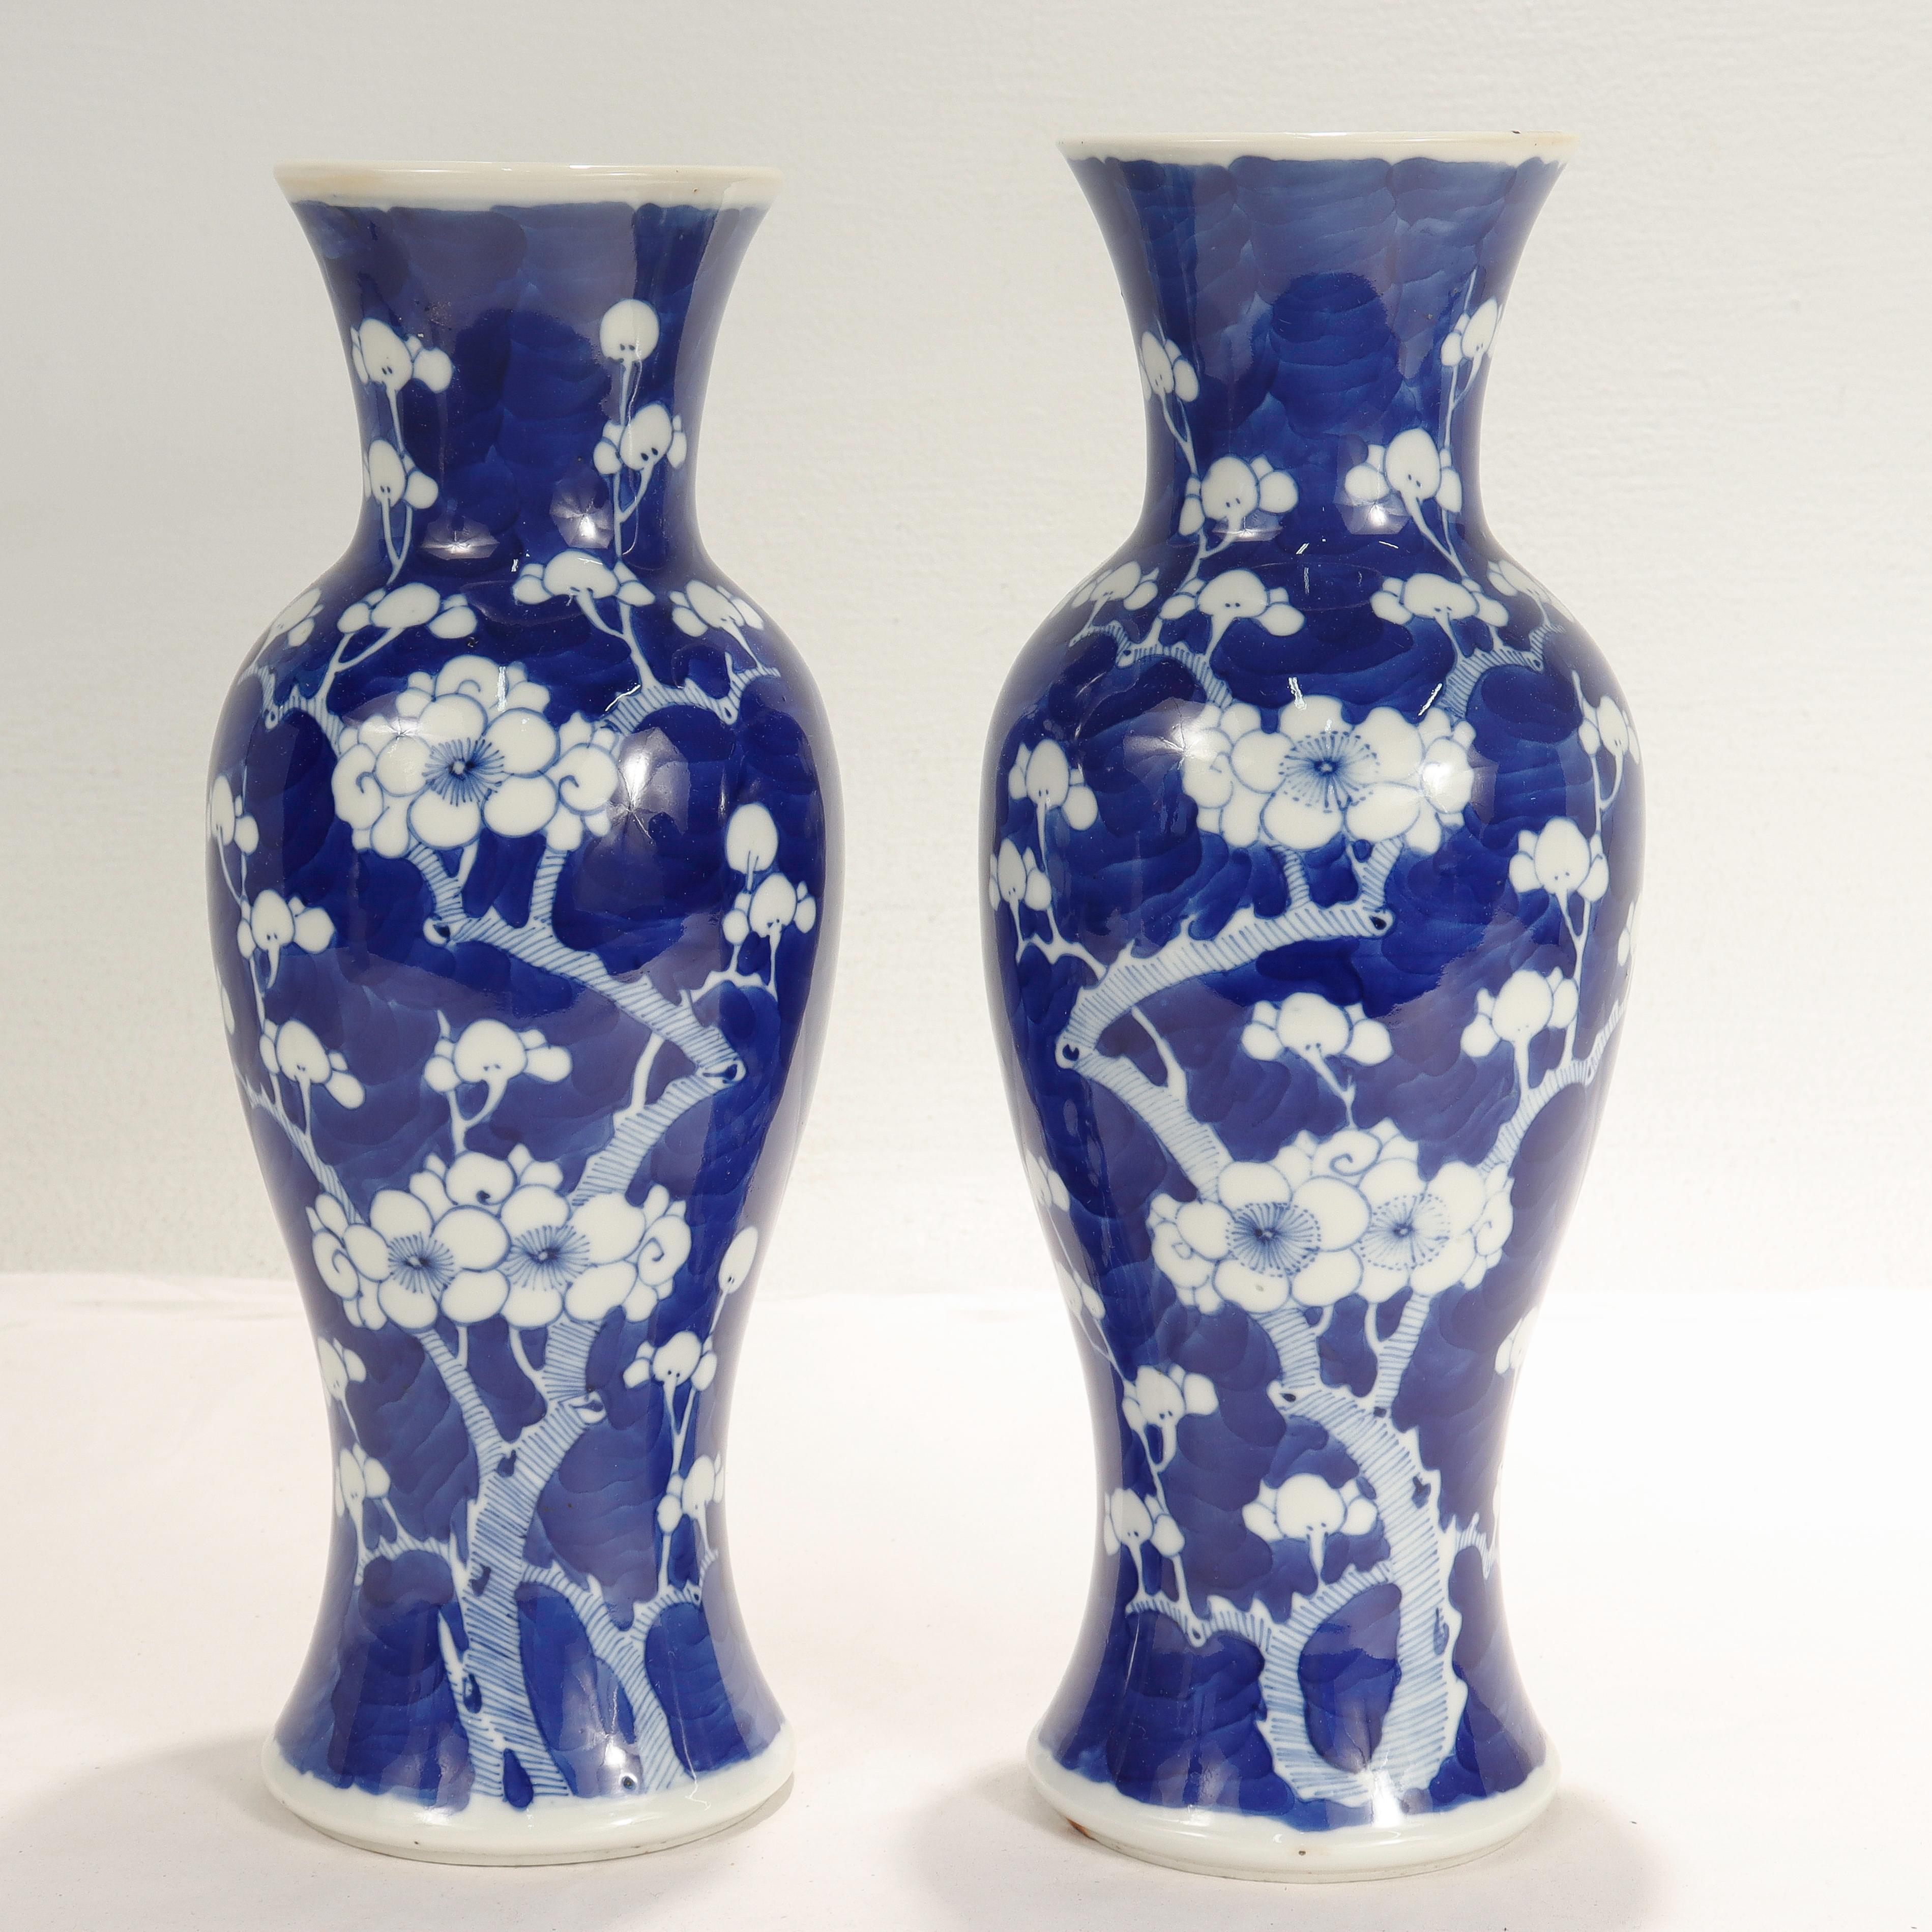 A fine complementary pair of Chinese porcelain vases.

In the baluster form.

Painted with blue underglaze decoration in the Hawthorne pattern with prunus sprigs and a brushstroke background.

Simply wonderful Chinese